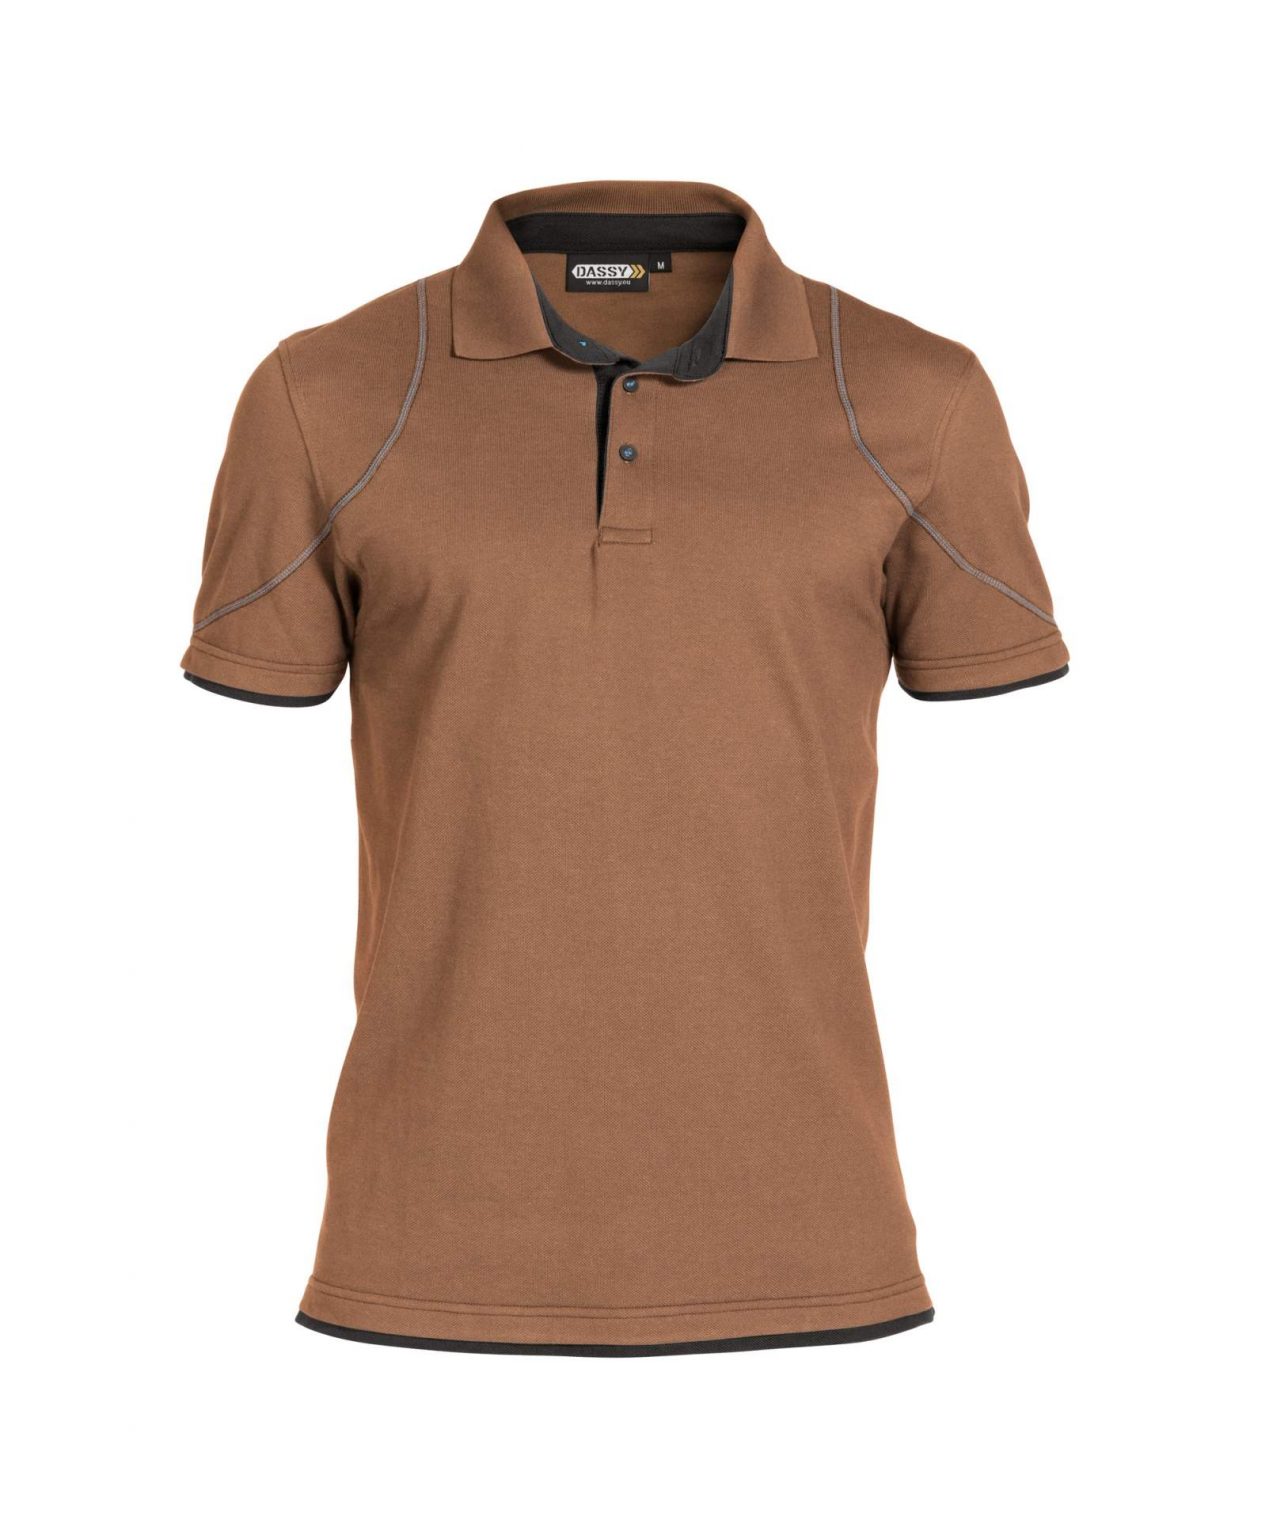 orbital polo shirt clay brown anthracite grey front